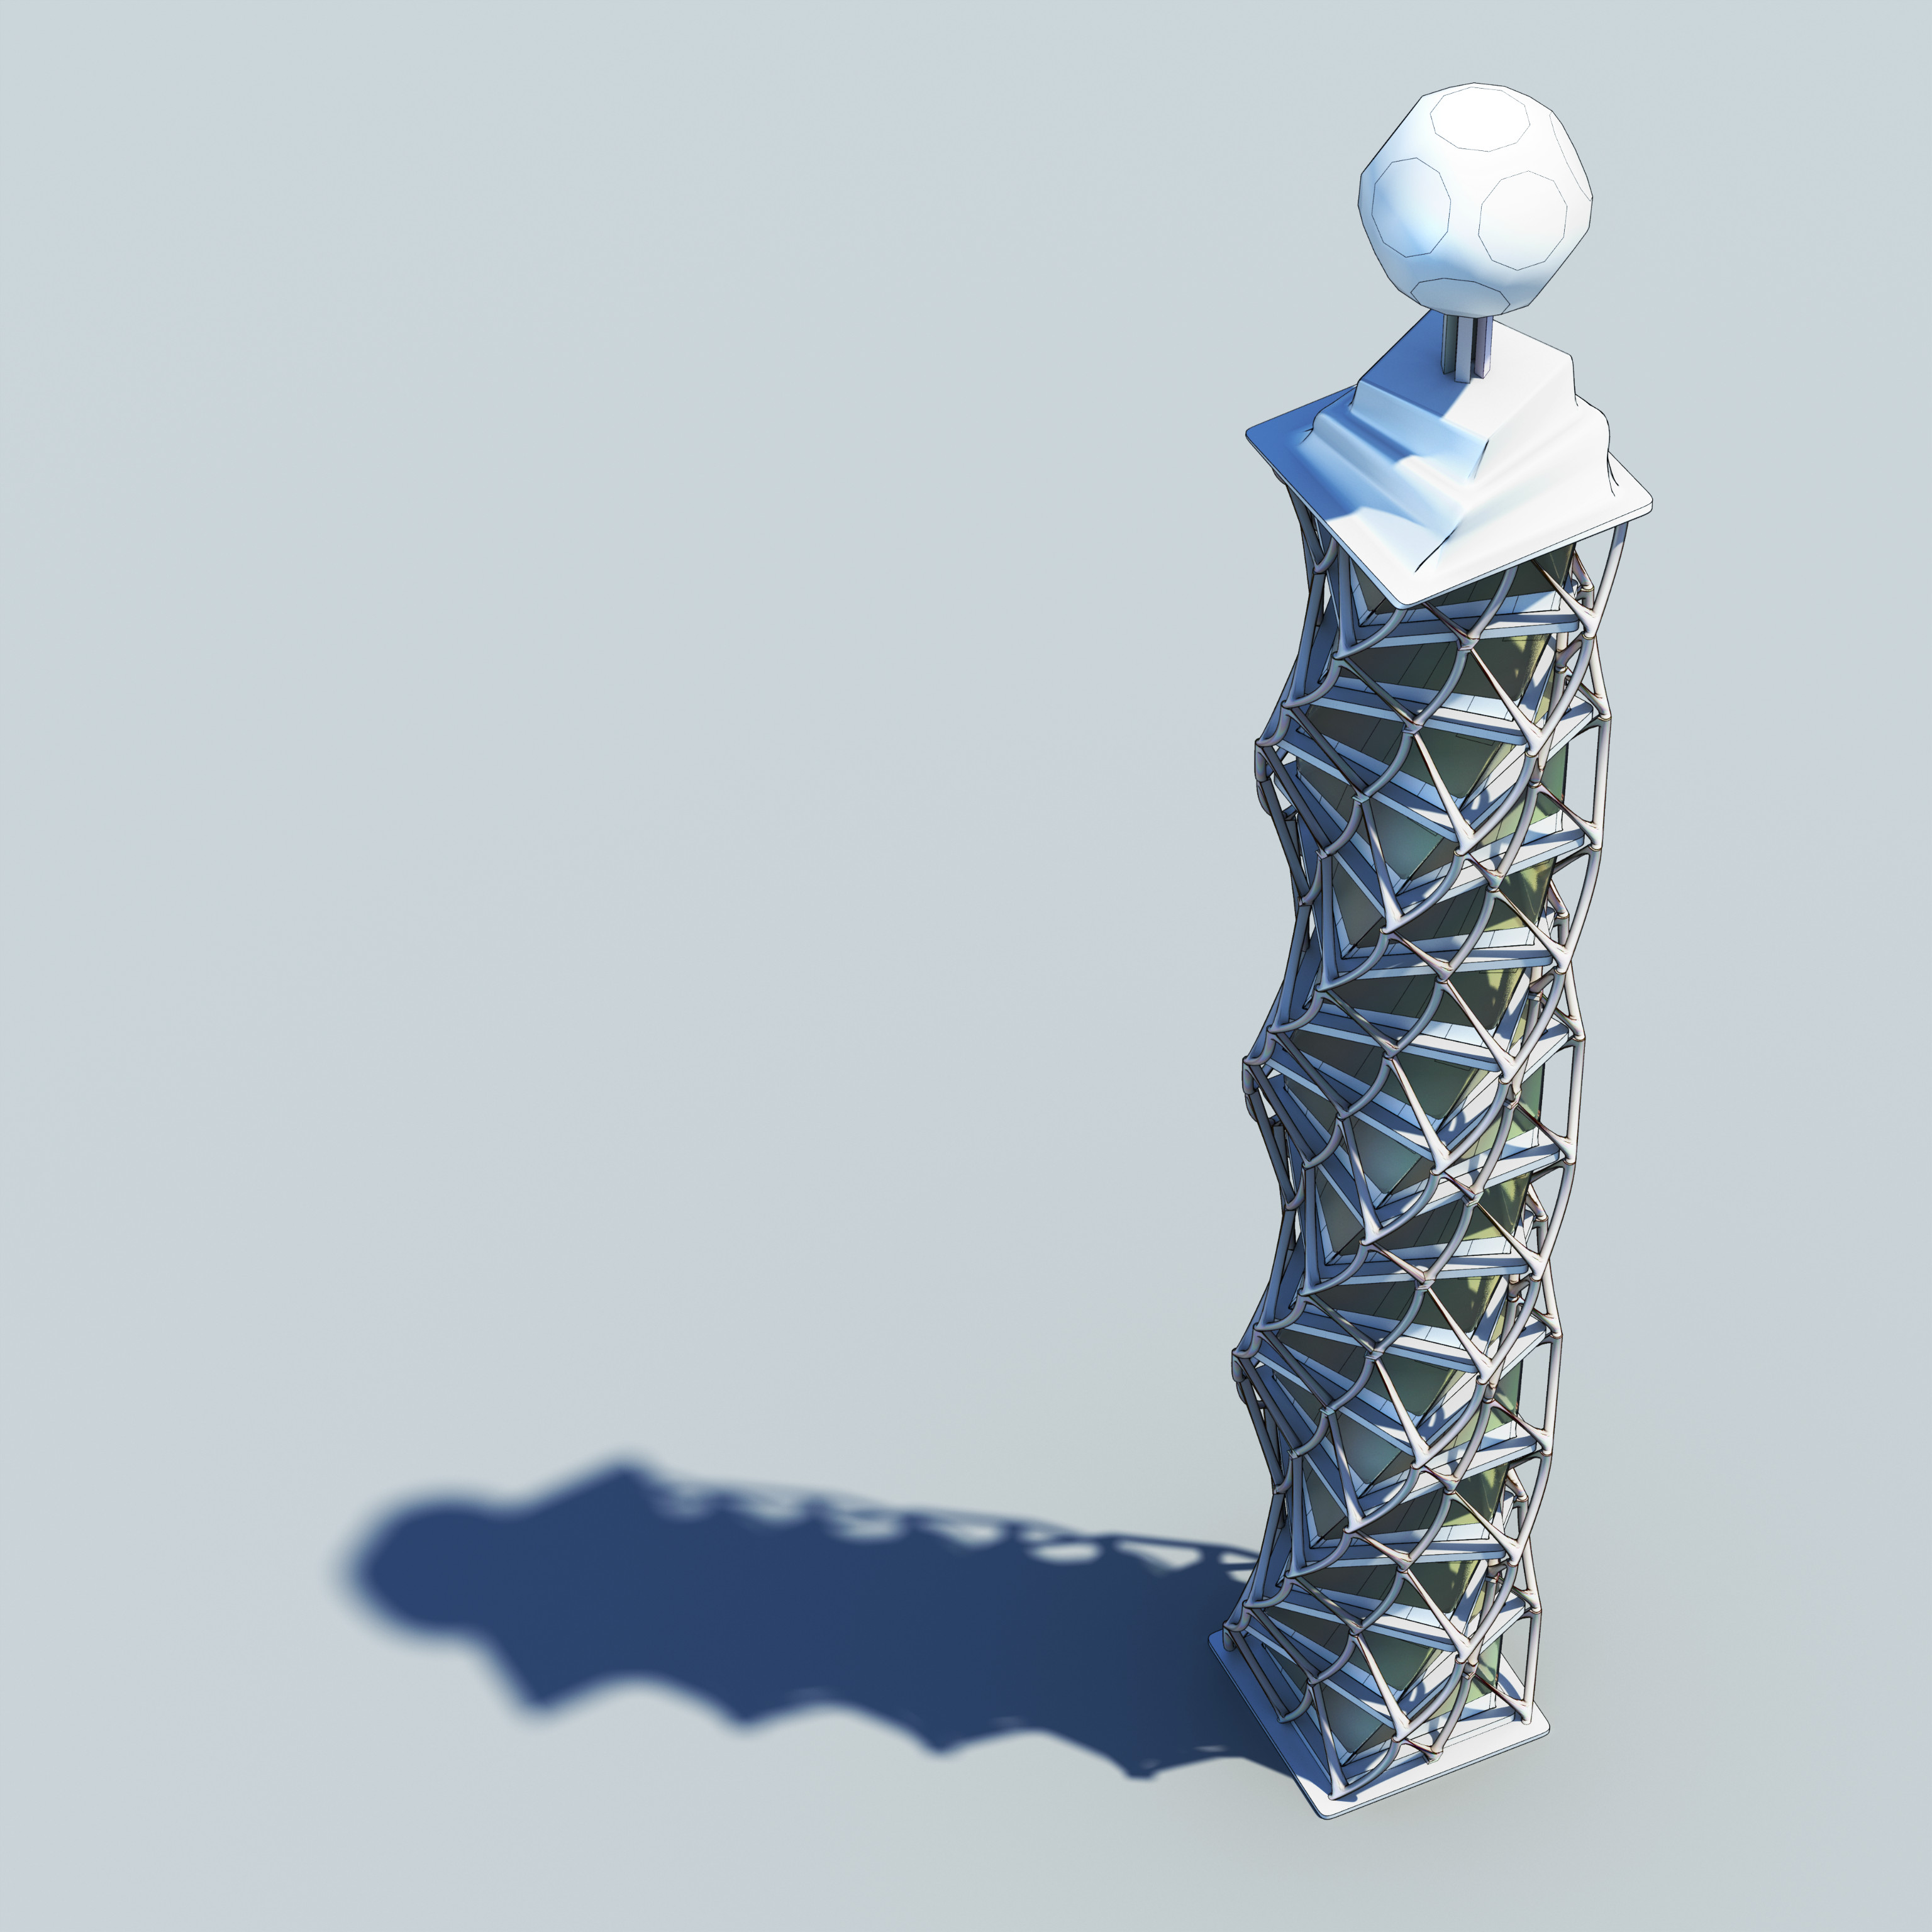 Procedurally-generated twisted tower with procedural external structural grid - bird's eye view - cel edge shader